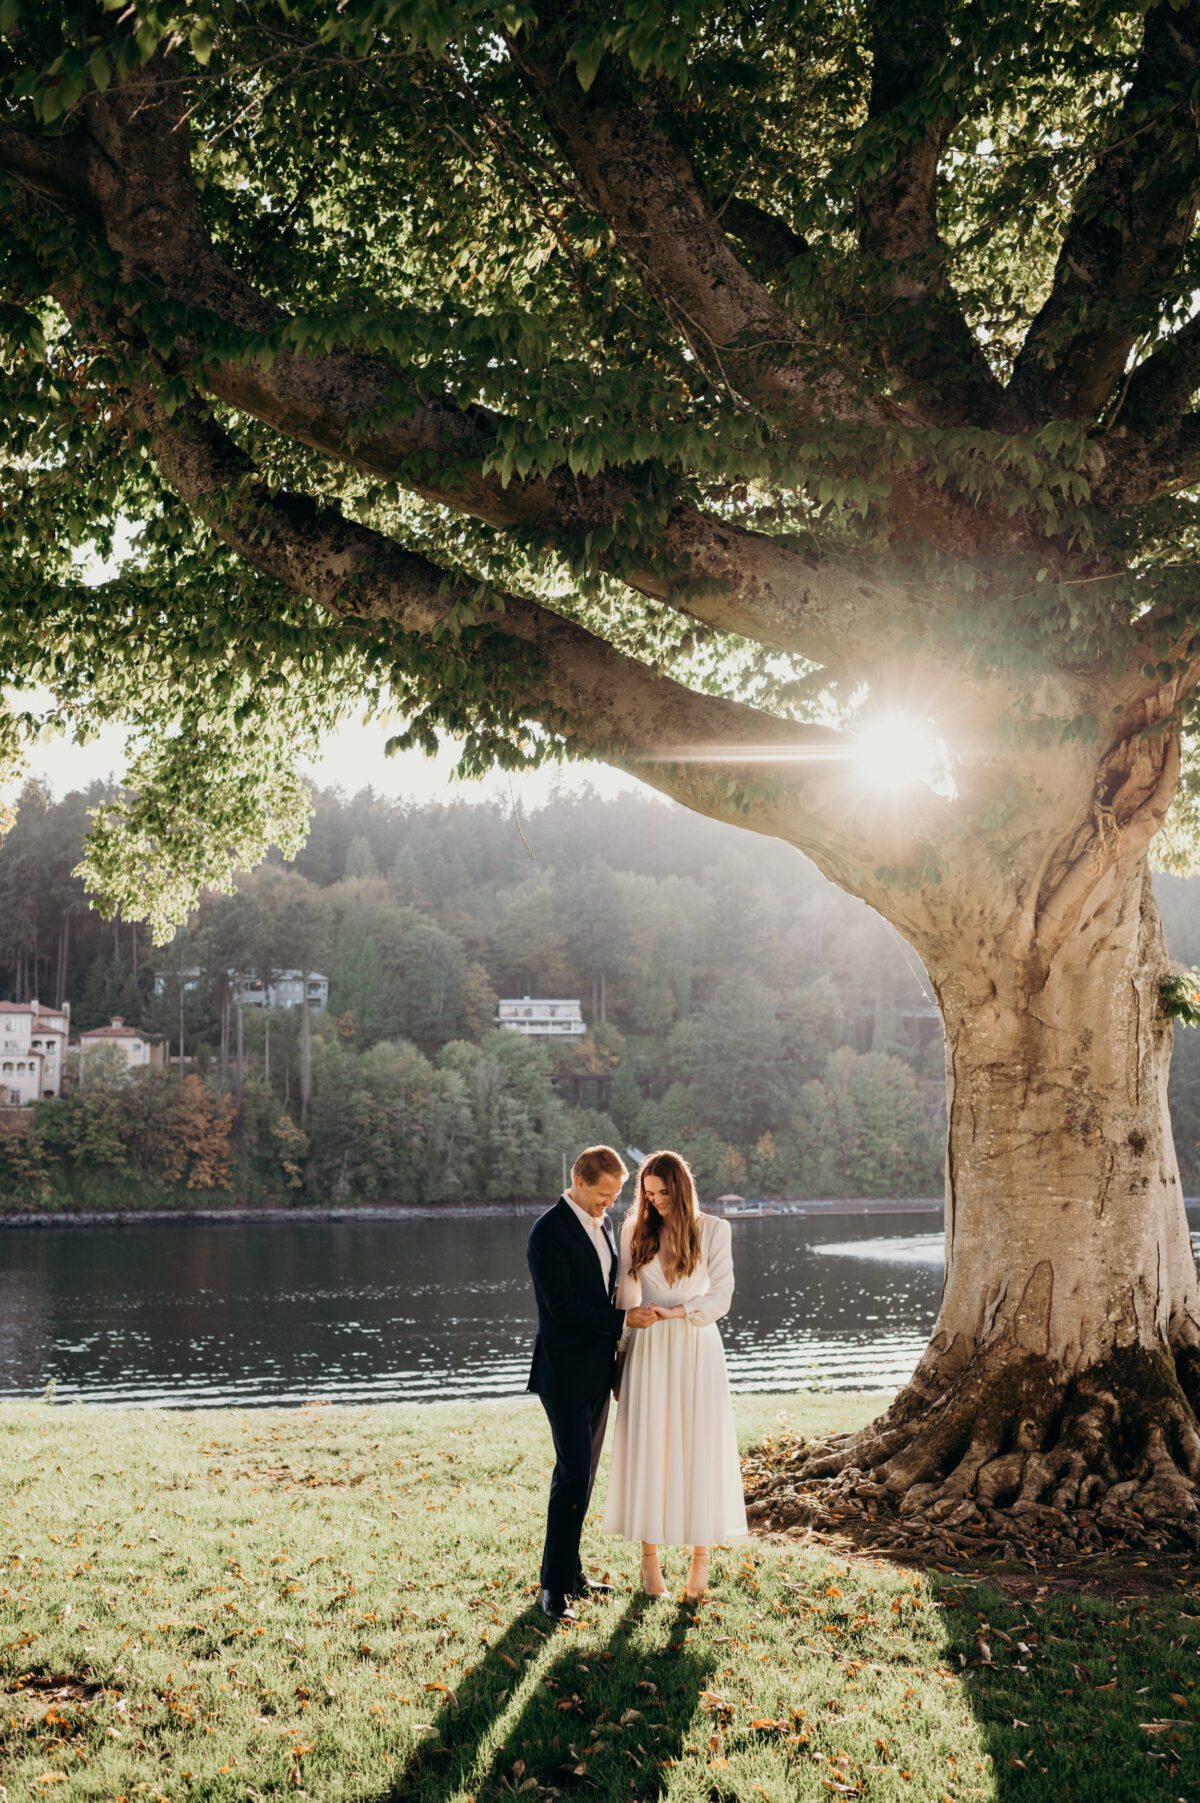 A bride and groom stand under a large tree at sunset with the Willamette River behind them.